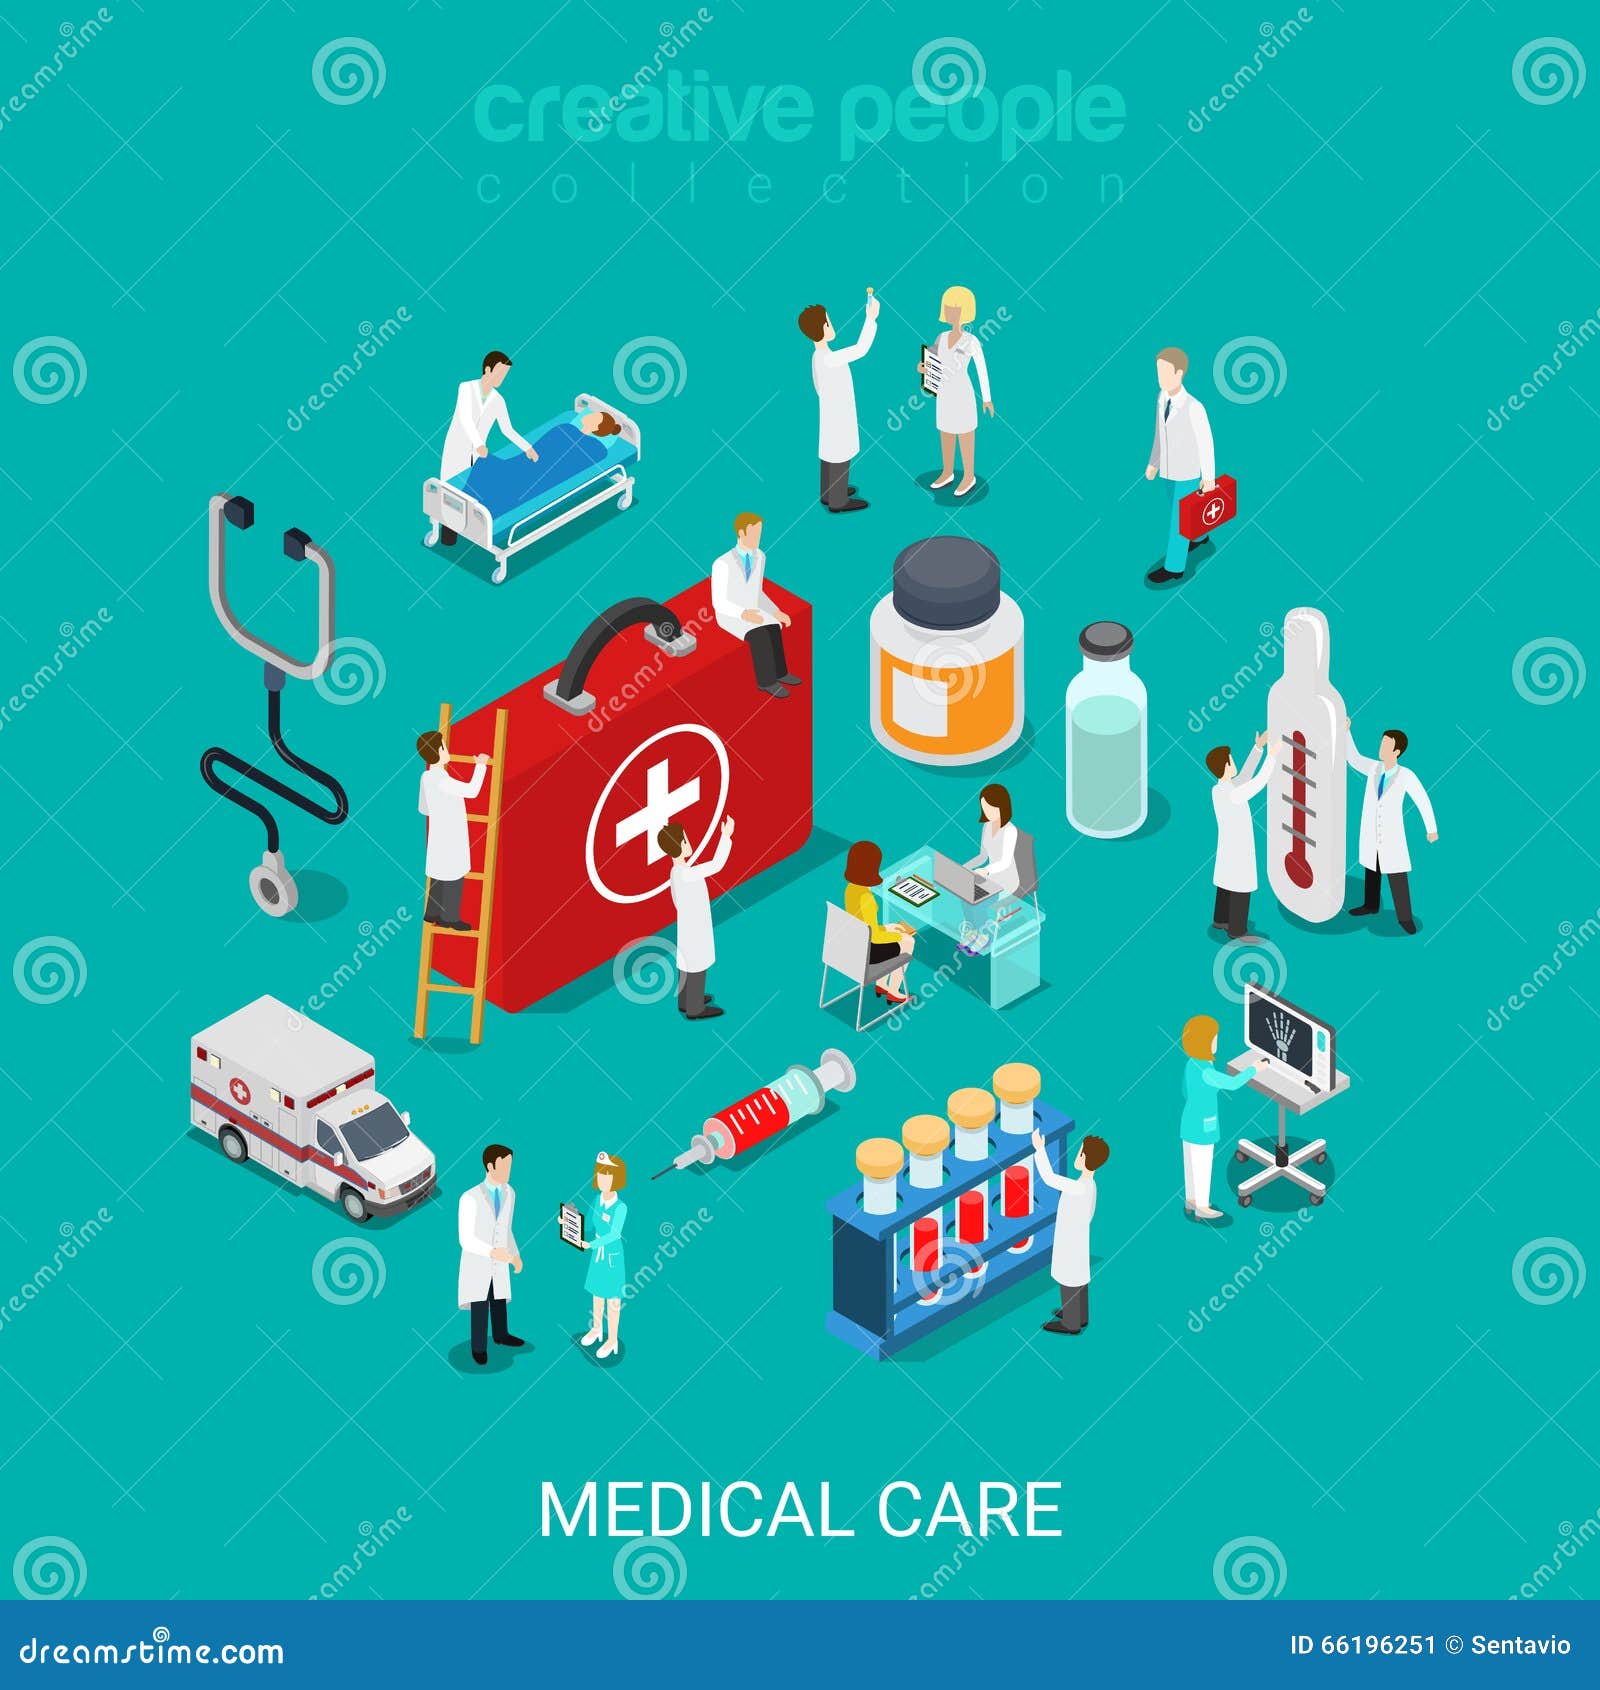 medical services doctor nurse first aid kit flat 3d isometric